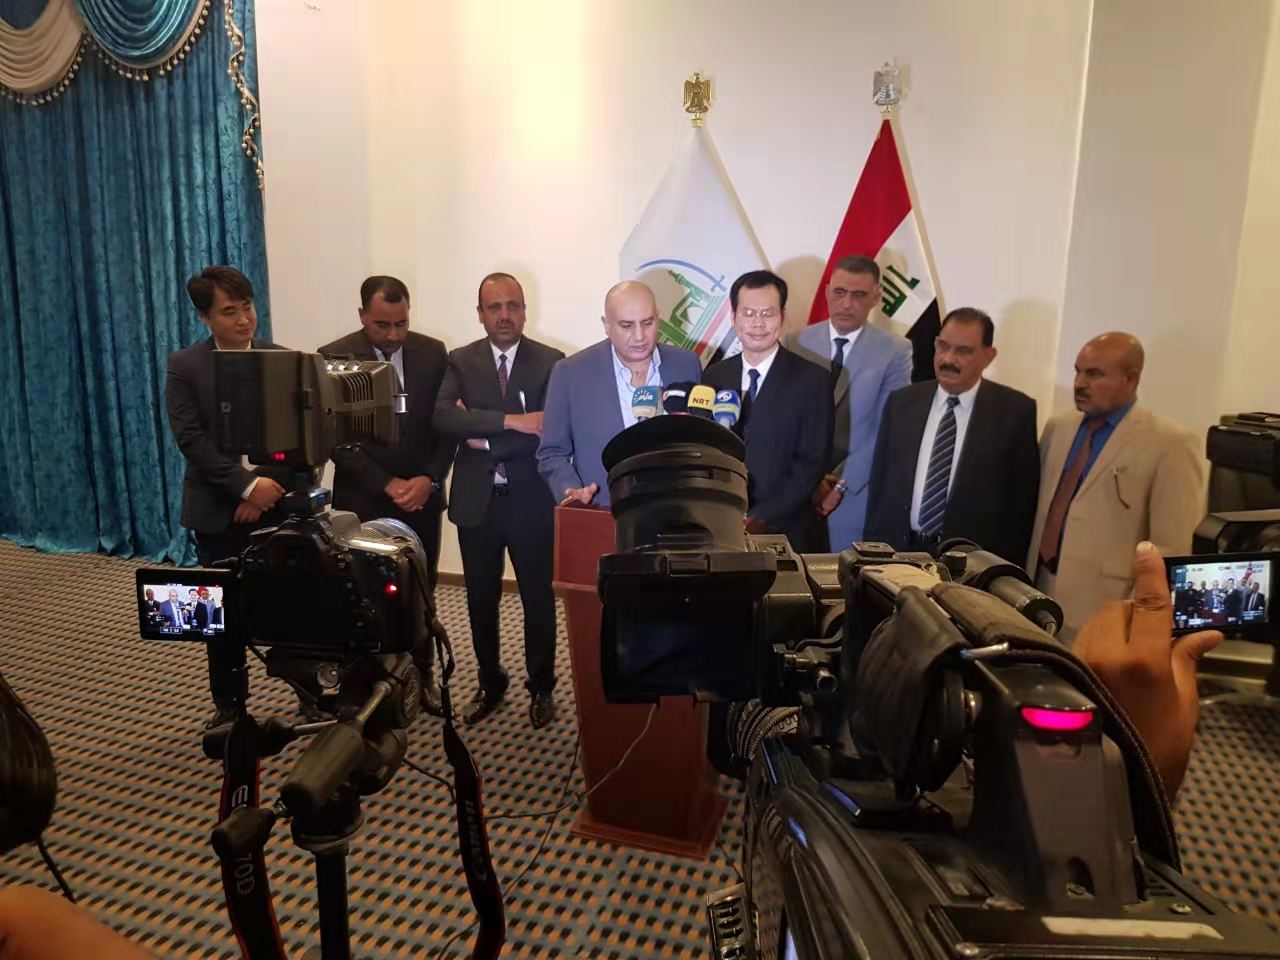 The Governor, the President of Governorate Council and the Chinese delegation were interviewed by local media